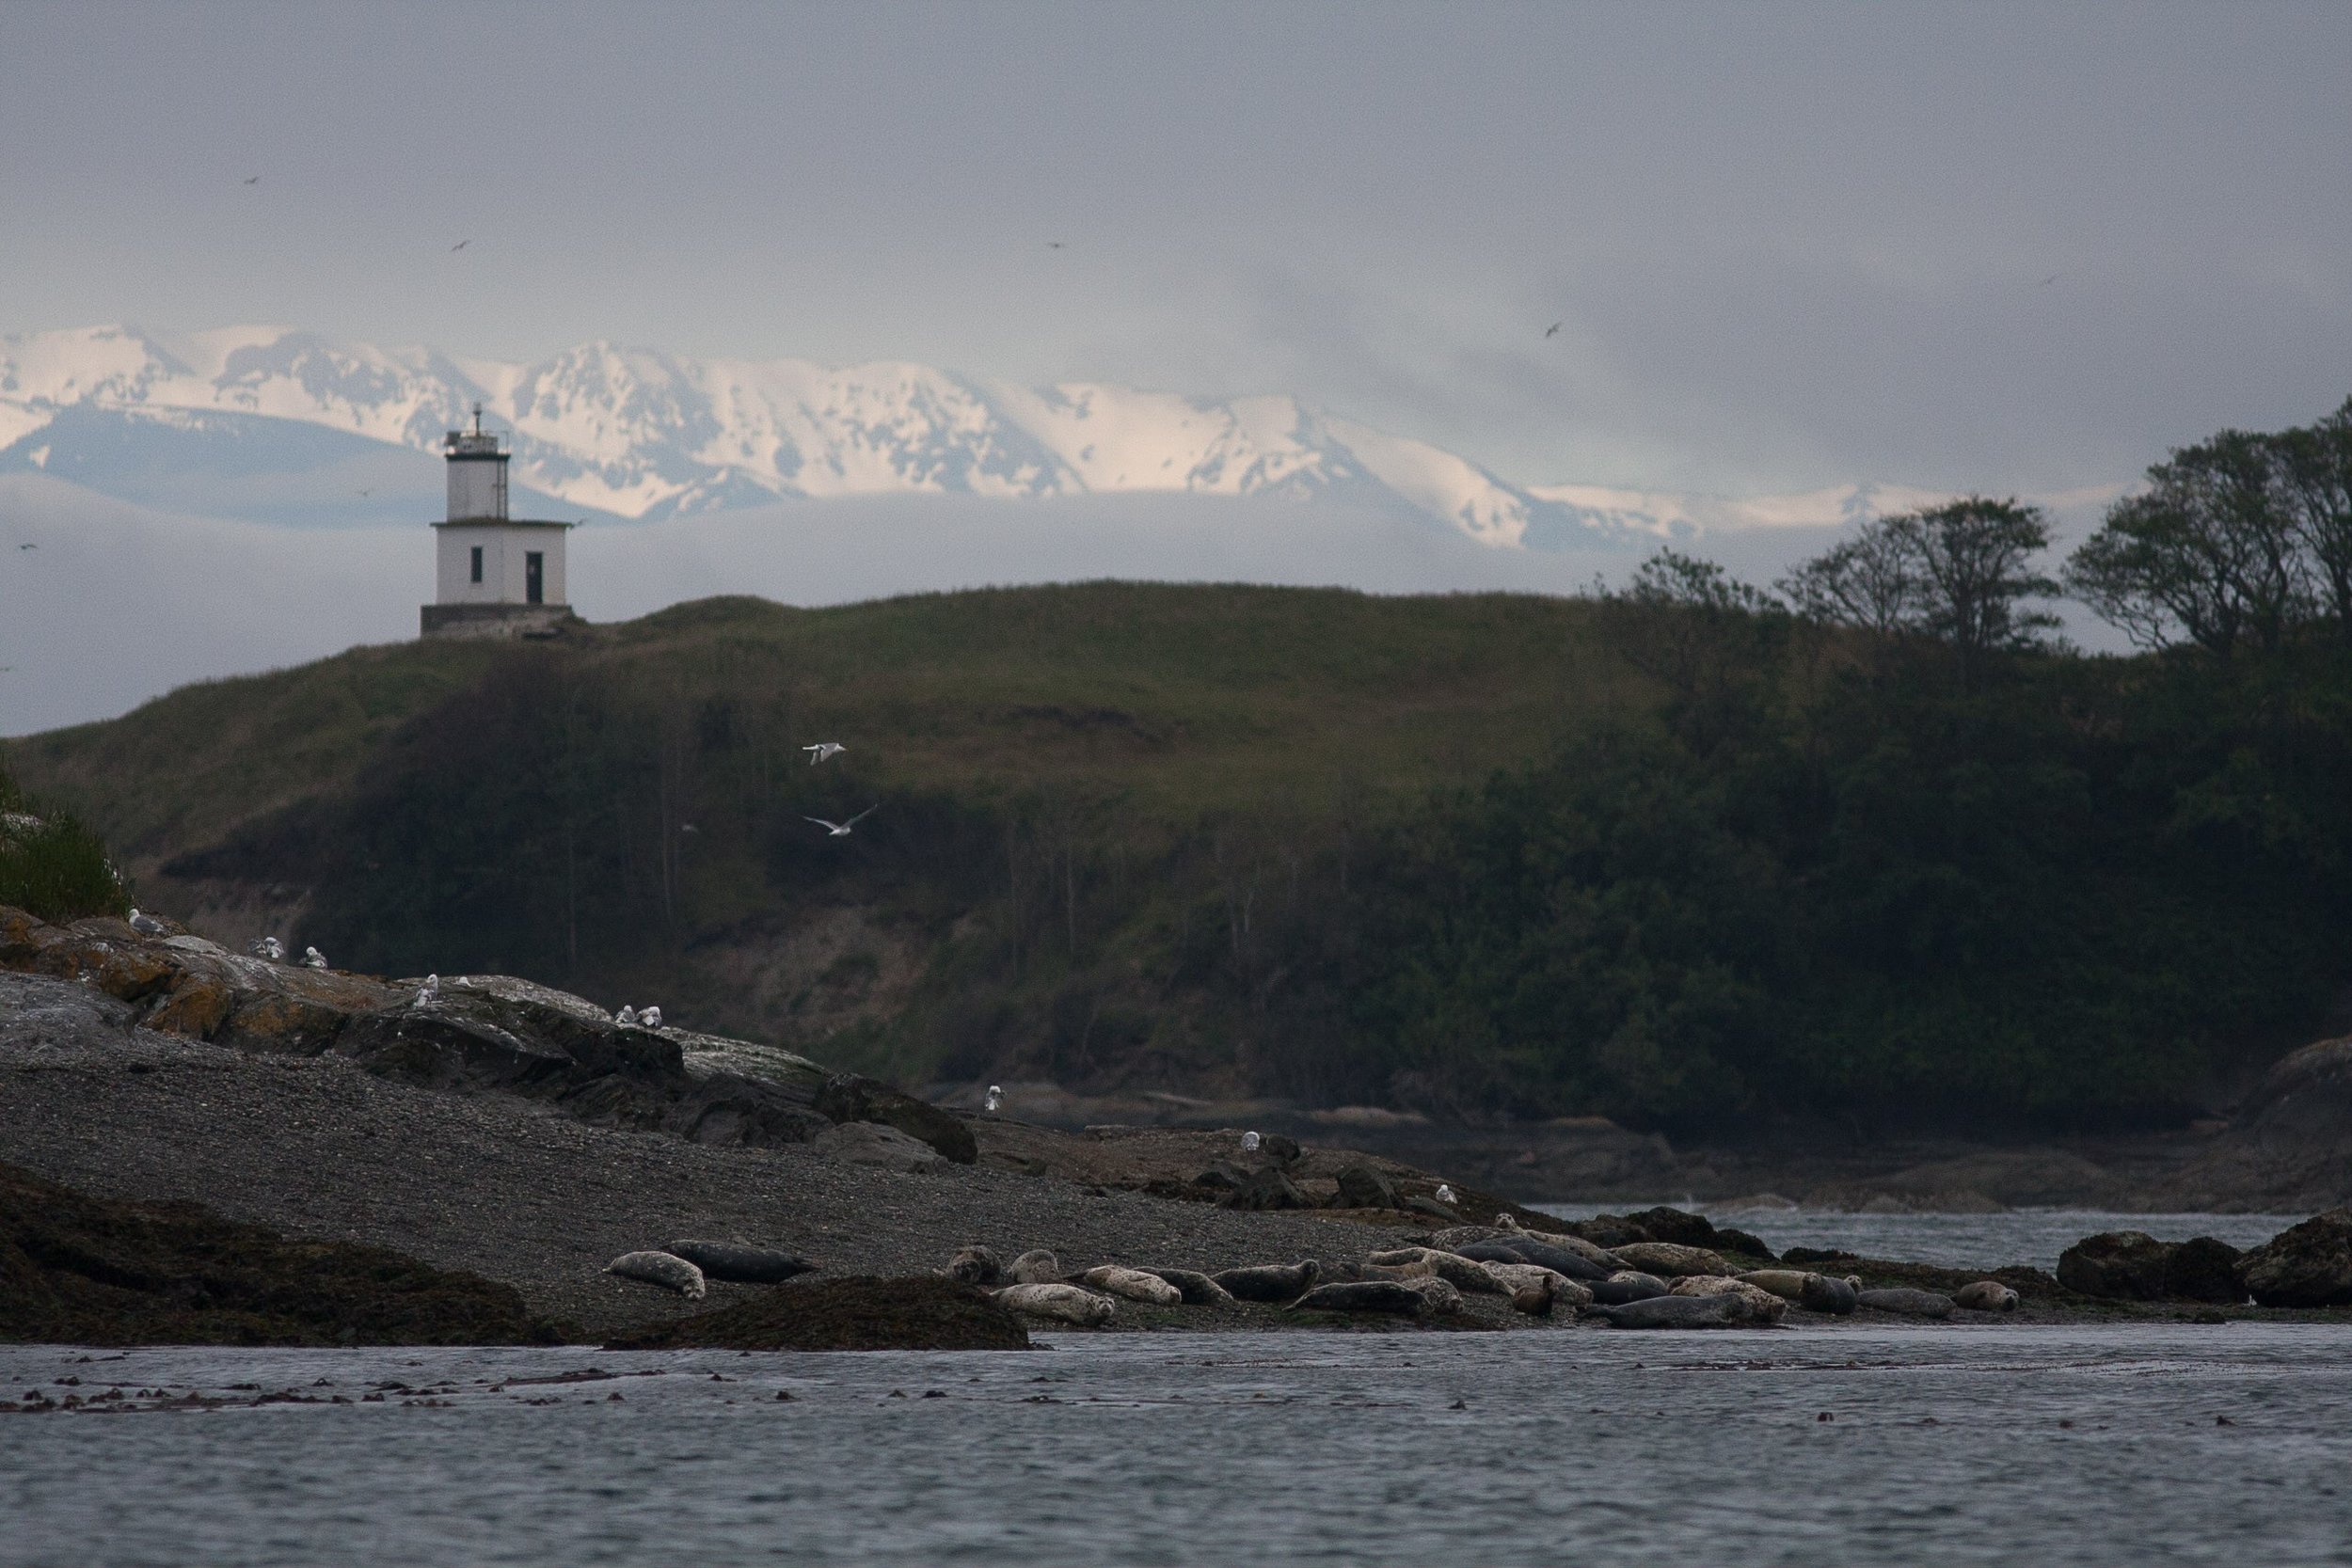   Harbor seals on Goose Island with The Olympic Mountains and Cattle Point lighthouse in the background  